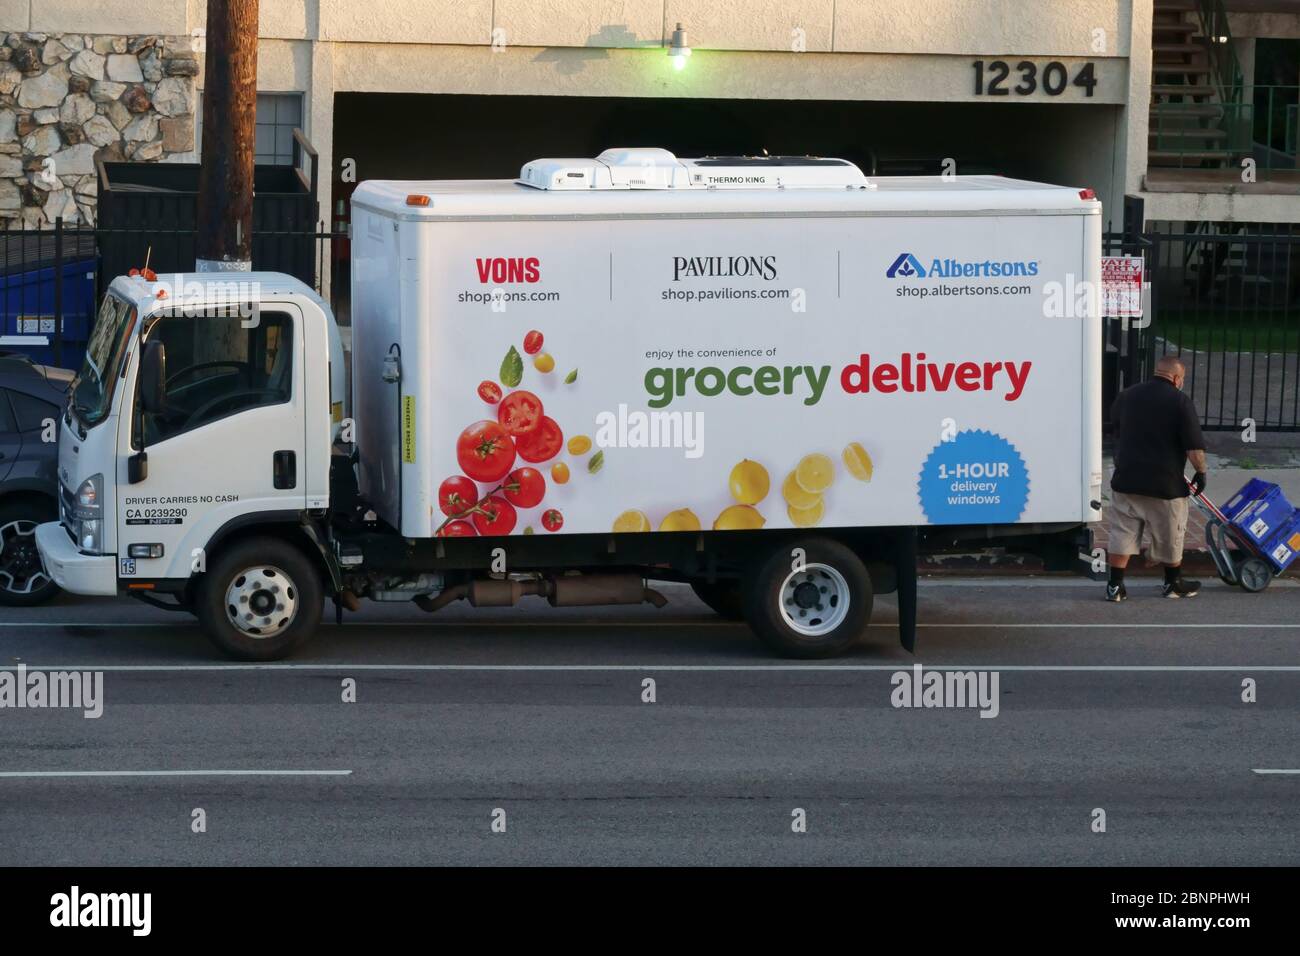 Los Angeles, CA / USA - May 8, 2020: A Vons, Pavilions, and Albertsons grocery stores delivery truck is shown parked on a city street. Stock Photo